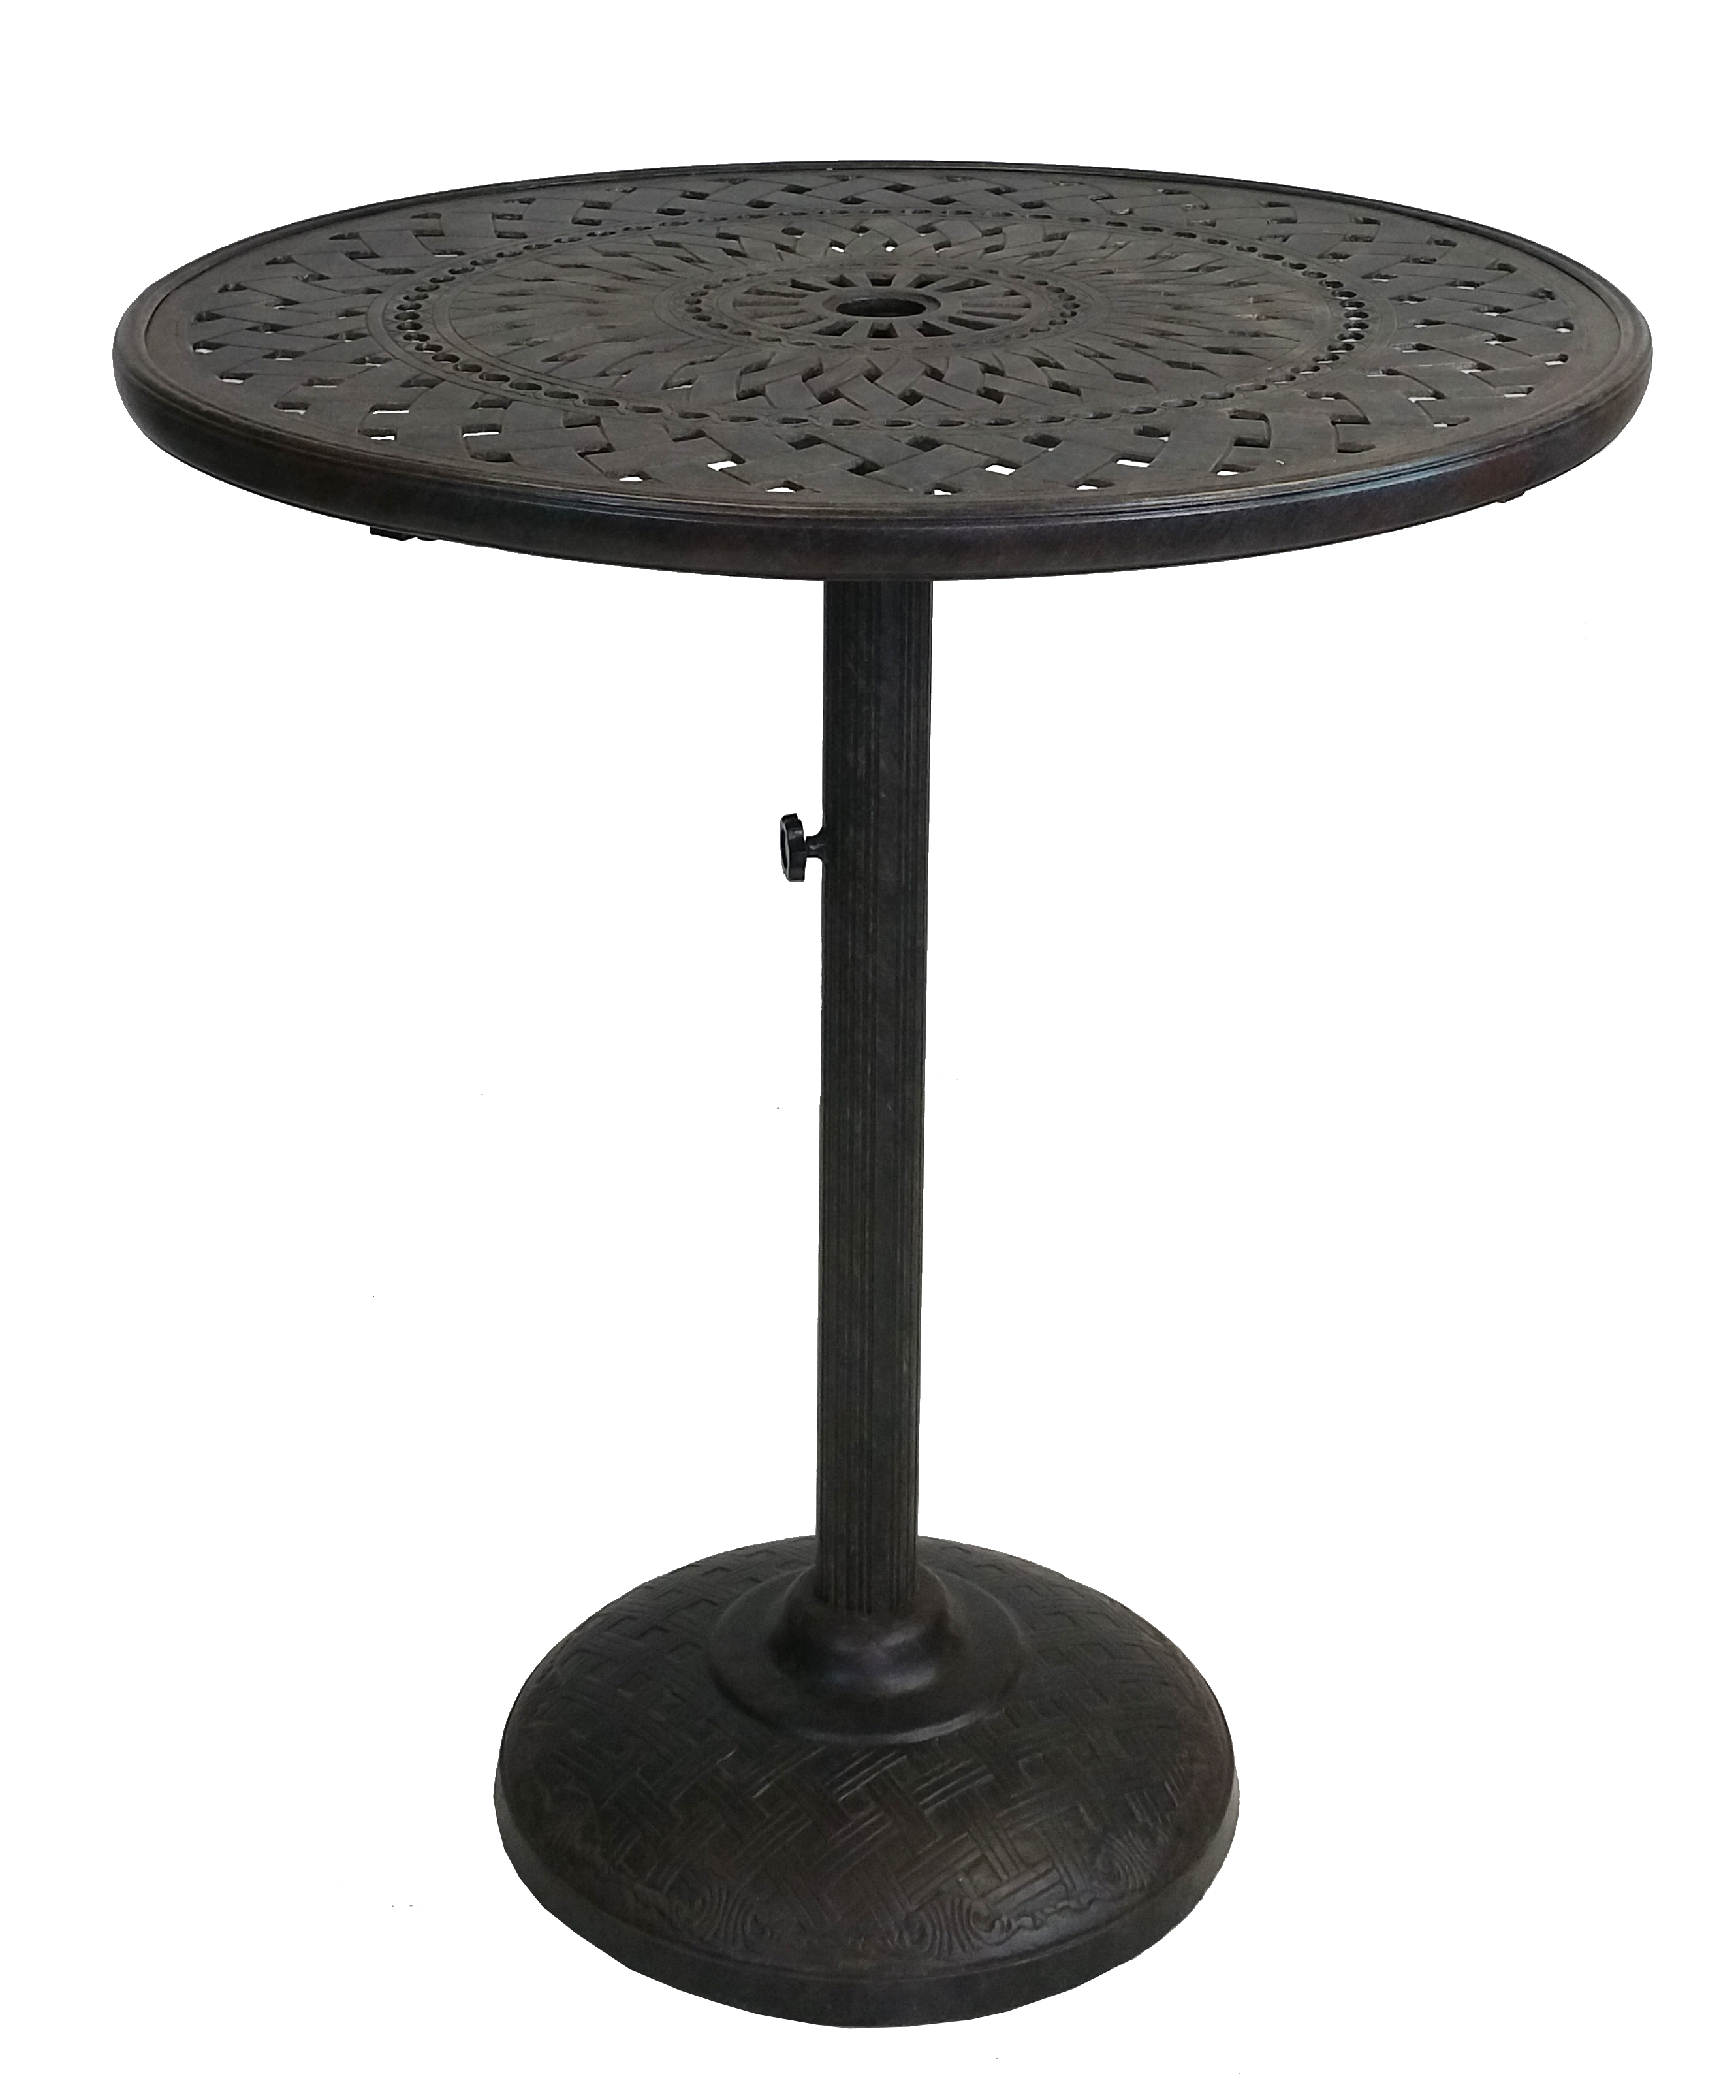 Oakland Living 42-inch Bar Table w/ built-in umbrella stand